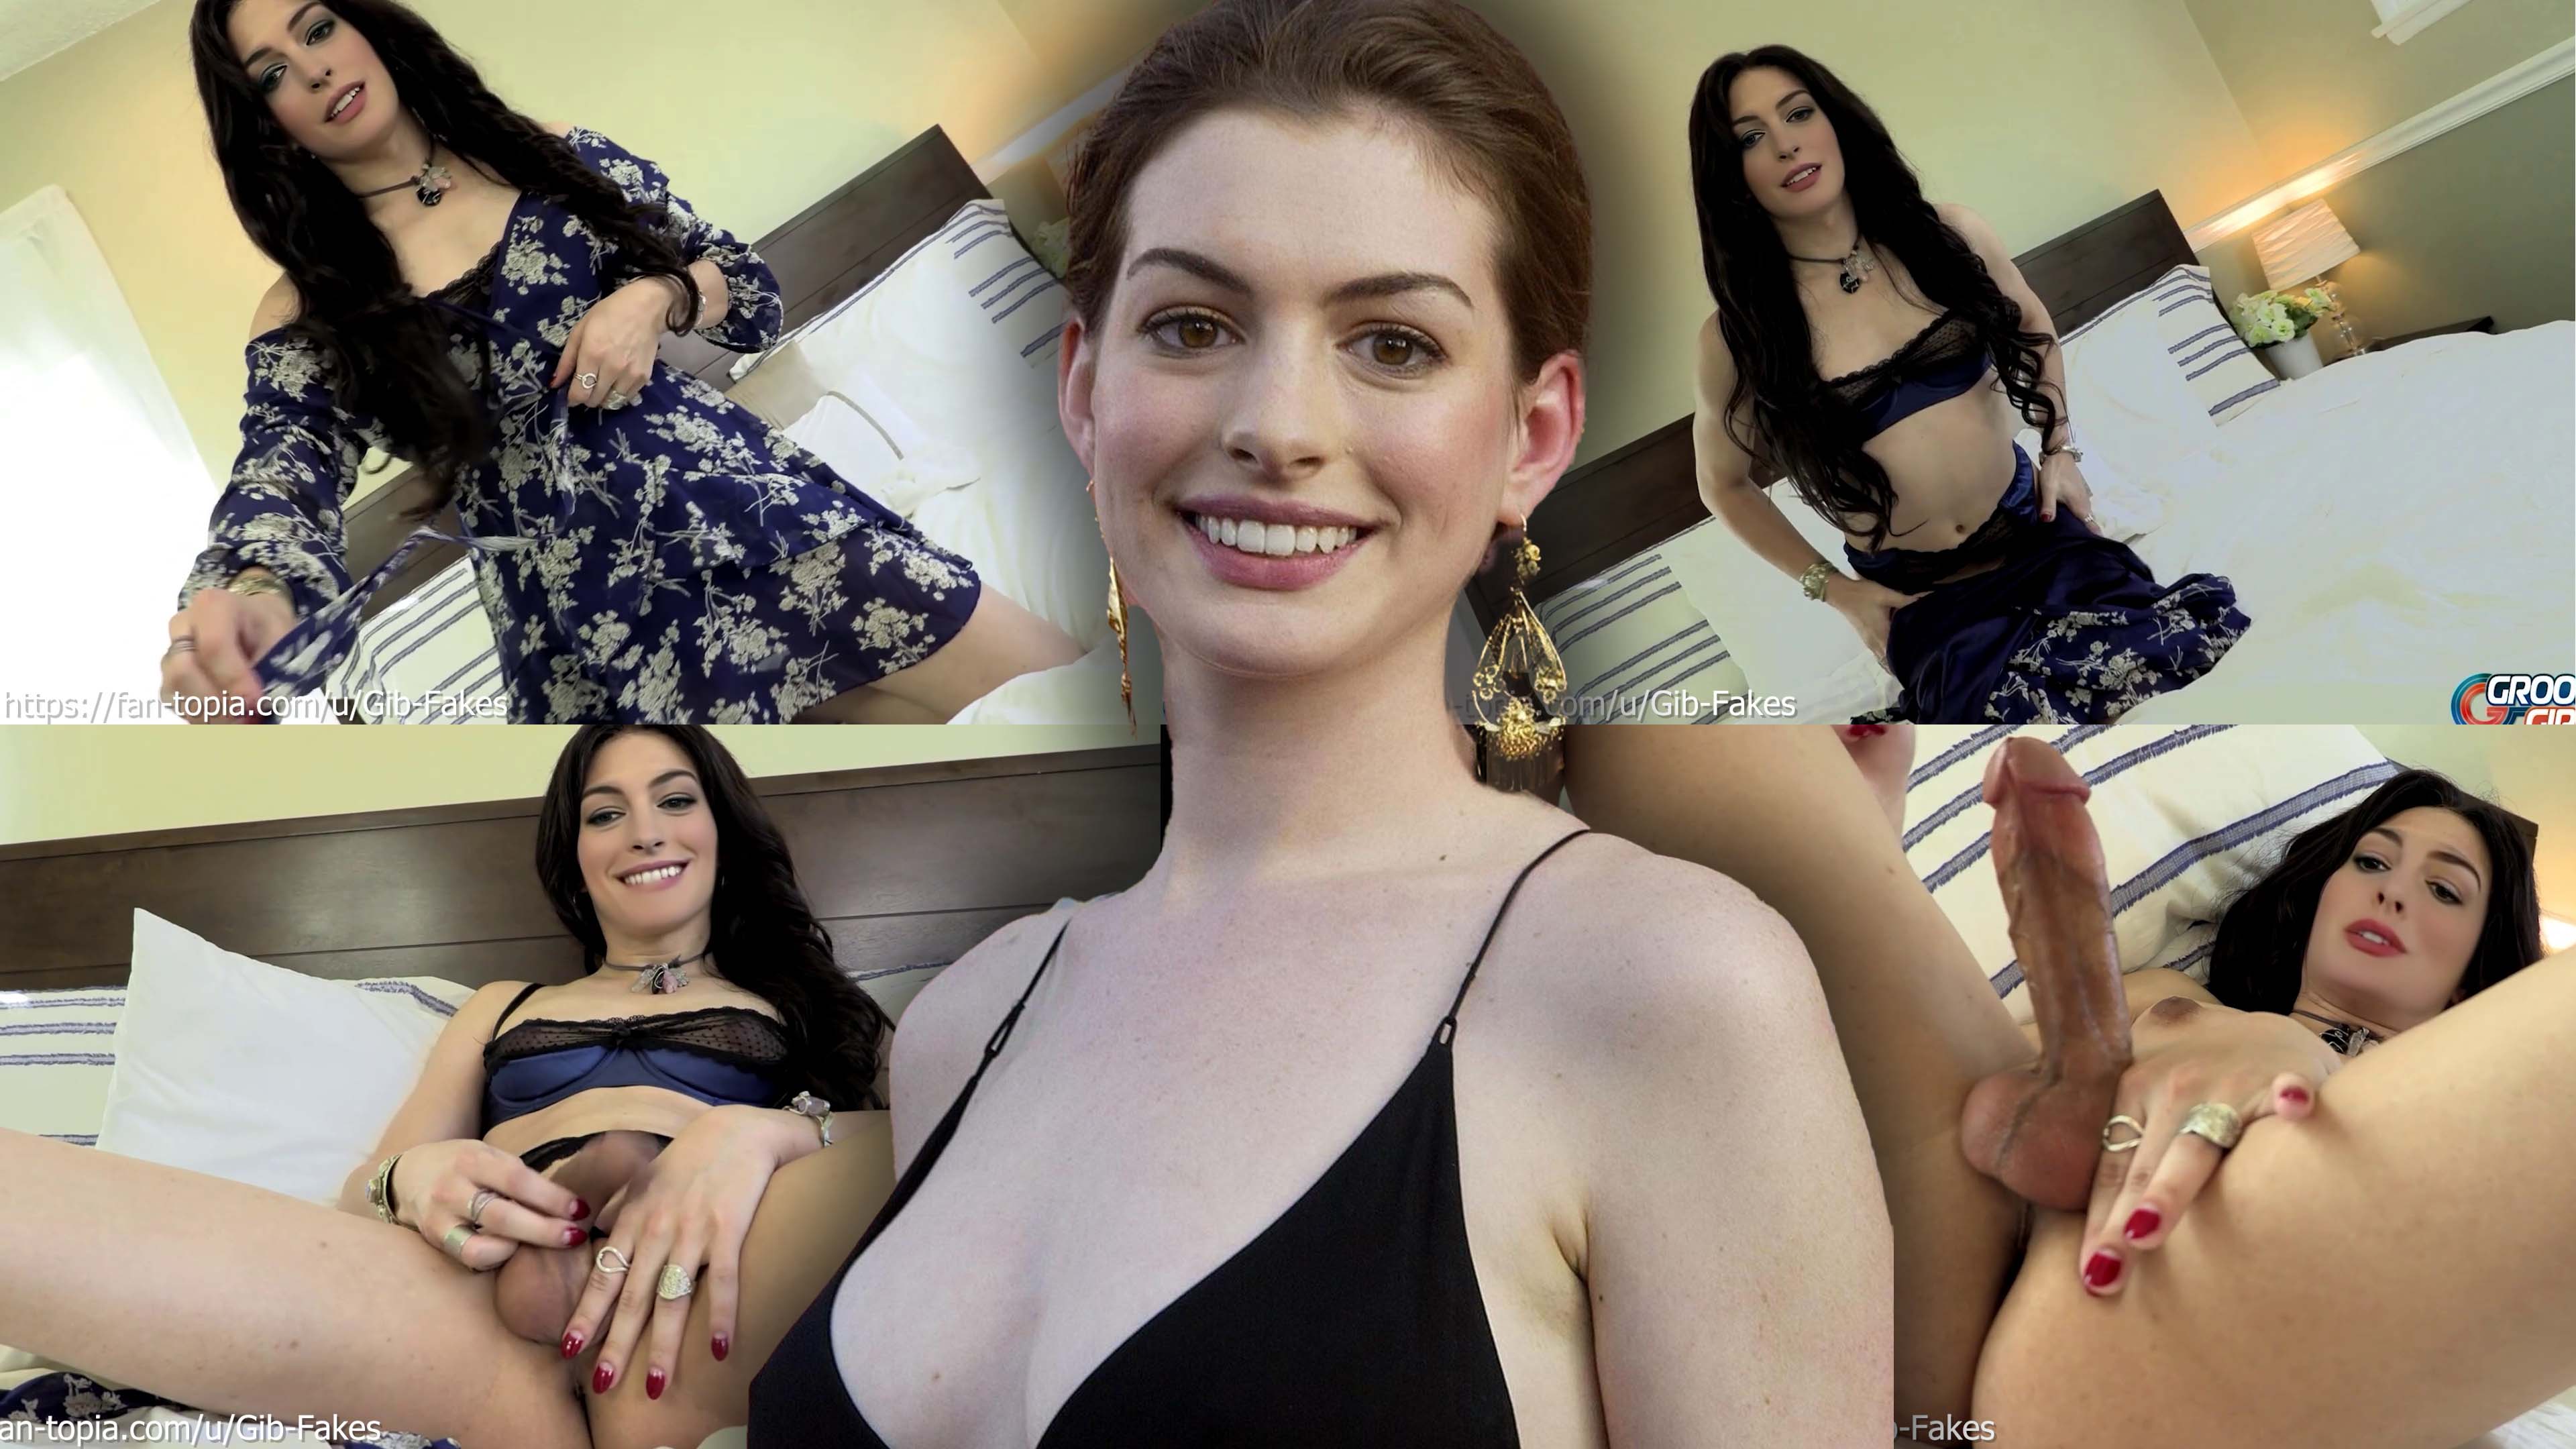 Celebrity Transexual Porn - Anne Hathaway Wants You to Join Her on the Bed for a Wank (trans) DeepFake  Porn - MrDeepFakes